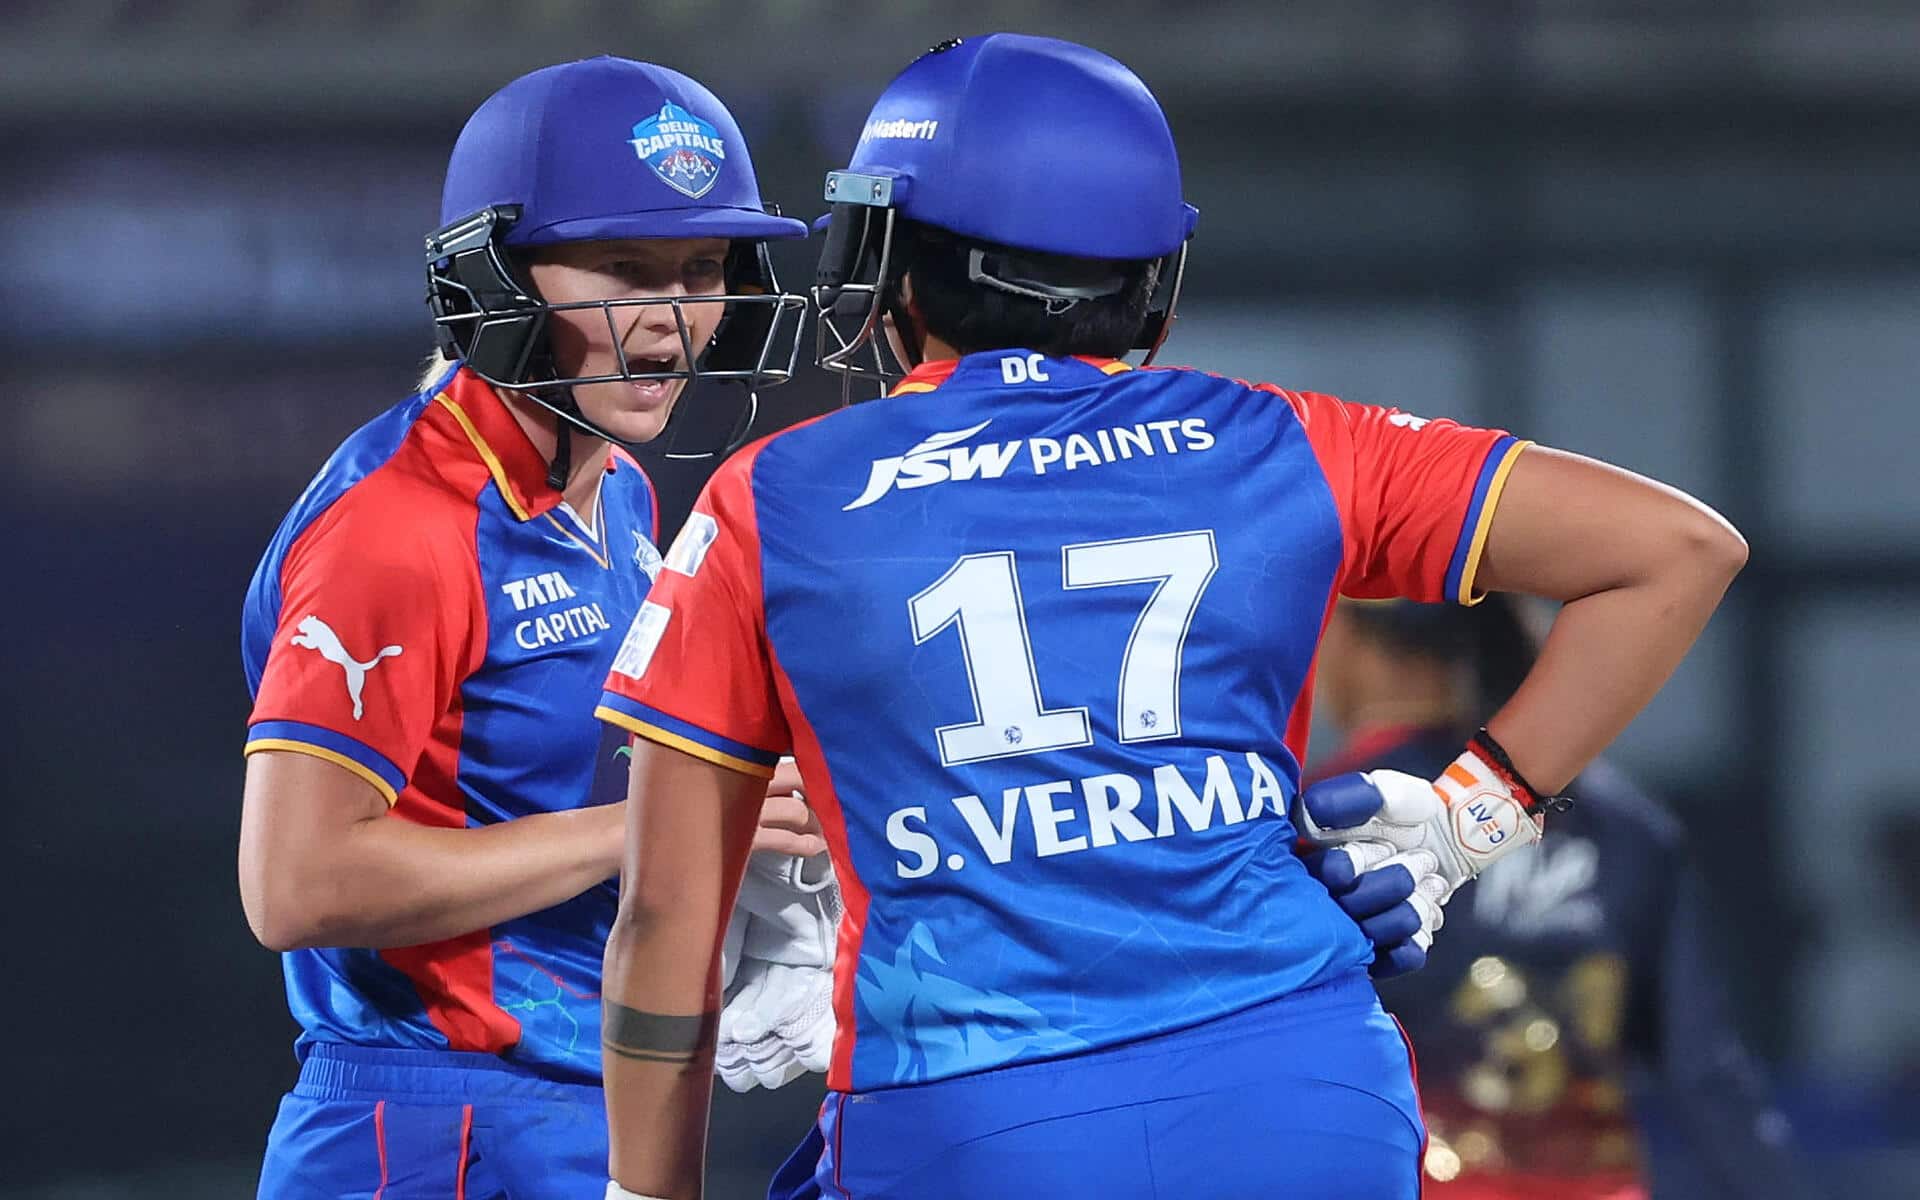 Meg Lanning and Shafali Verma open the batting for Delhi in the finals (Source: WPL)